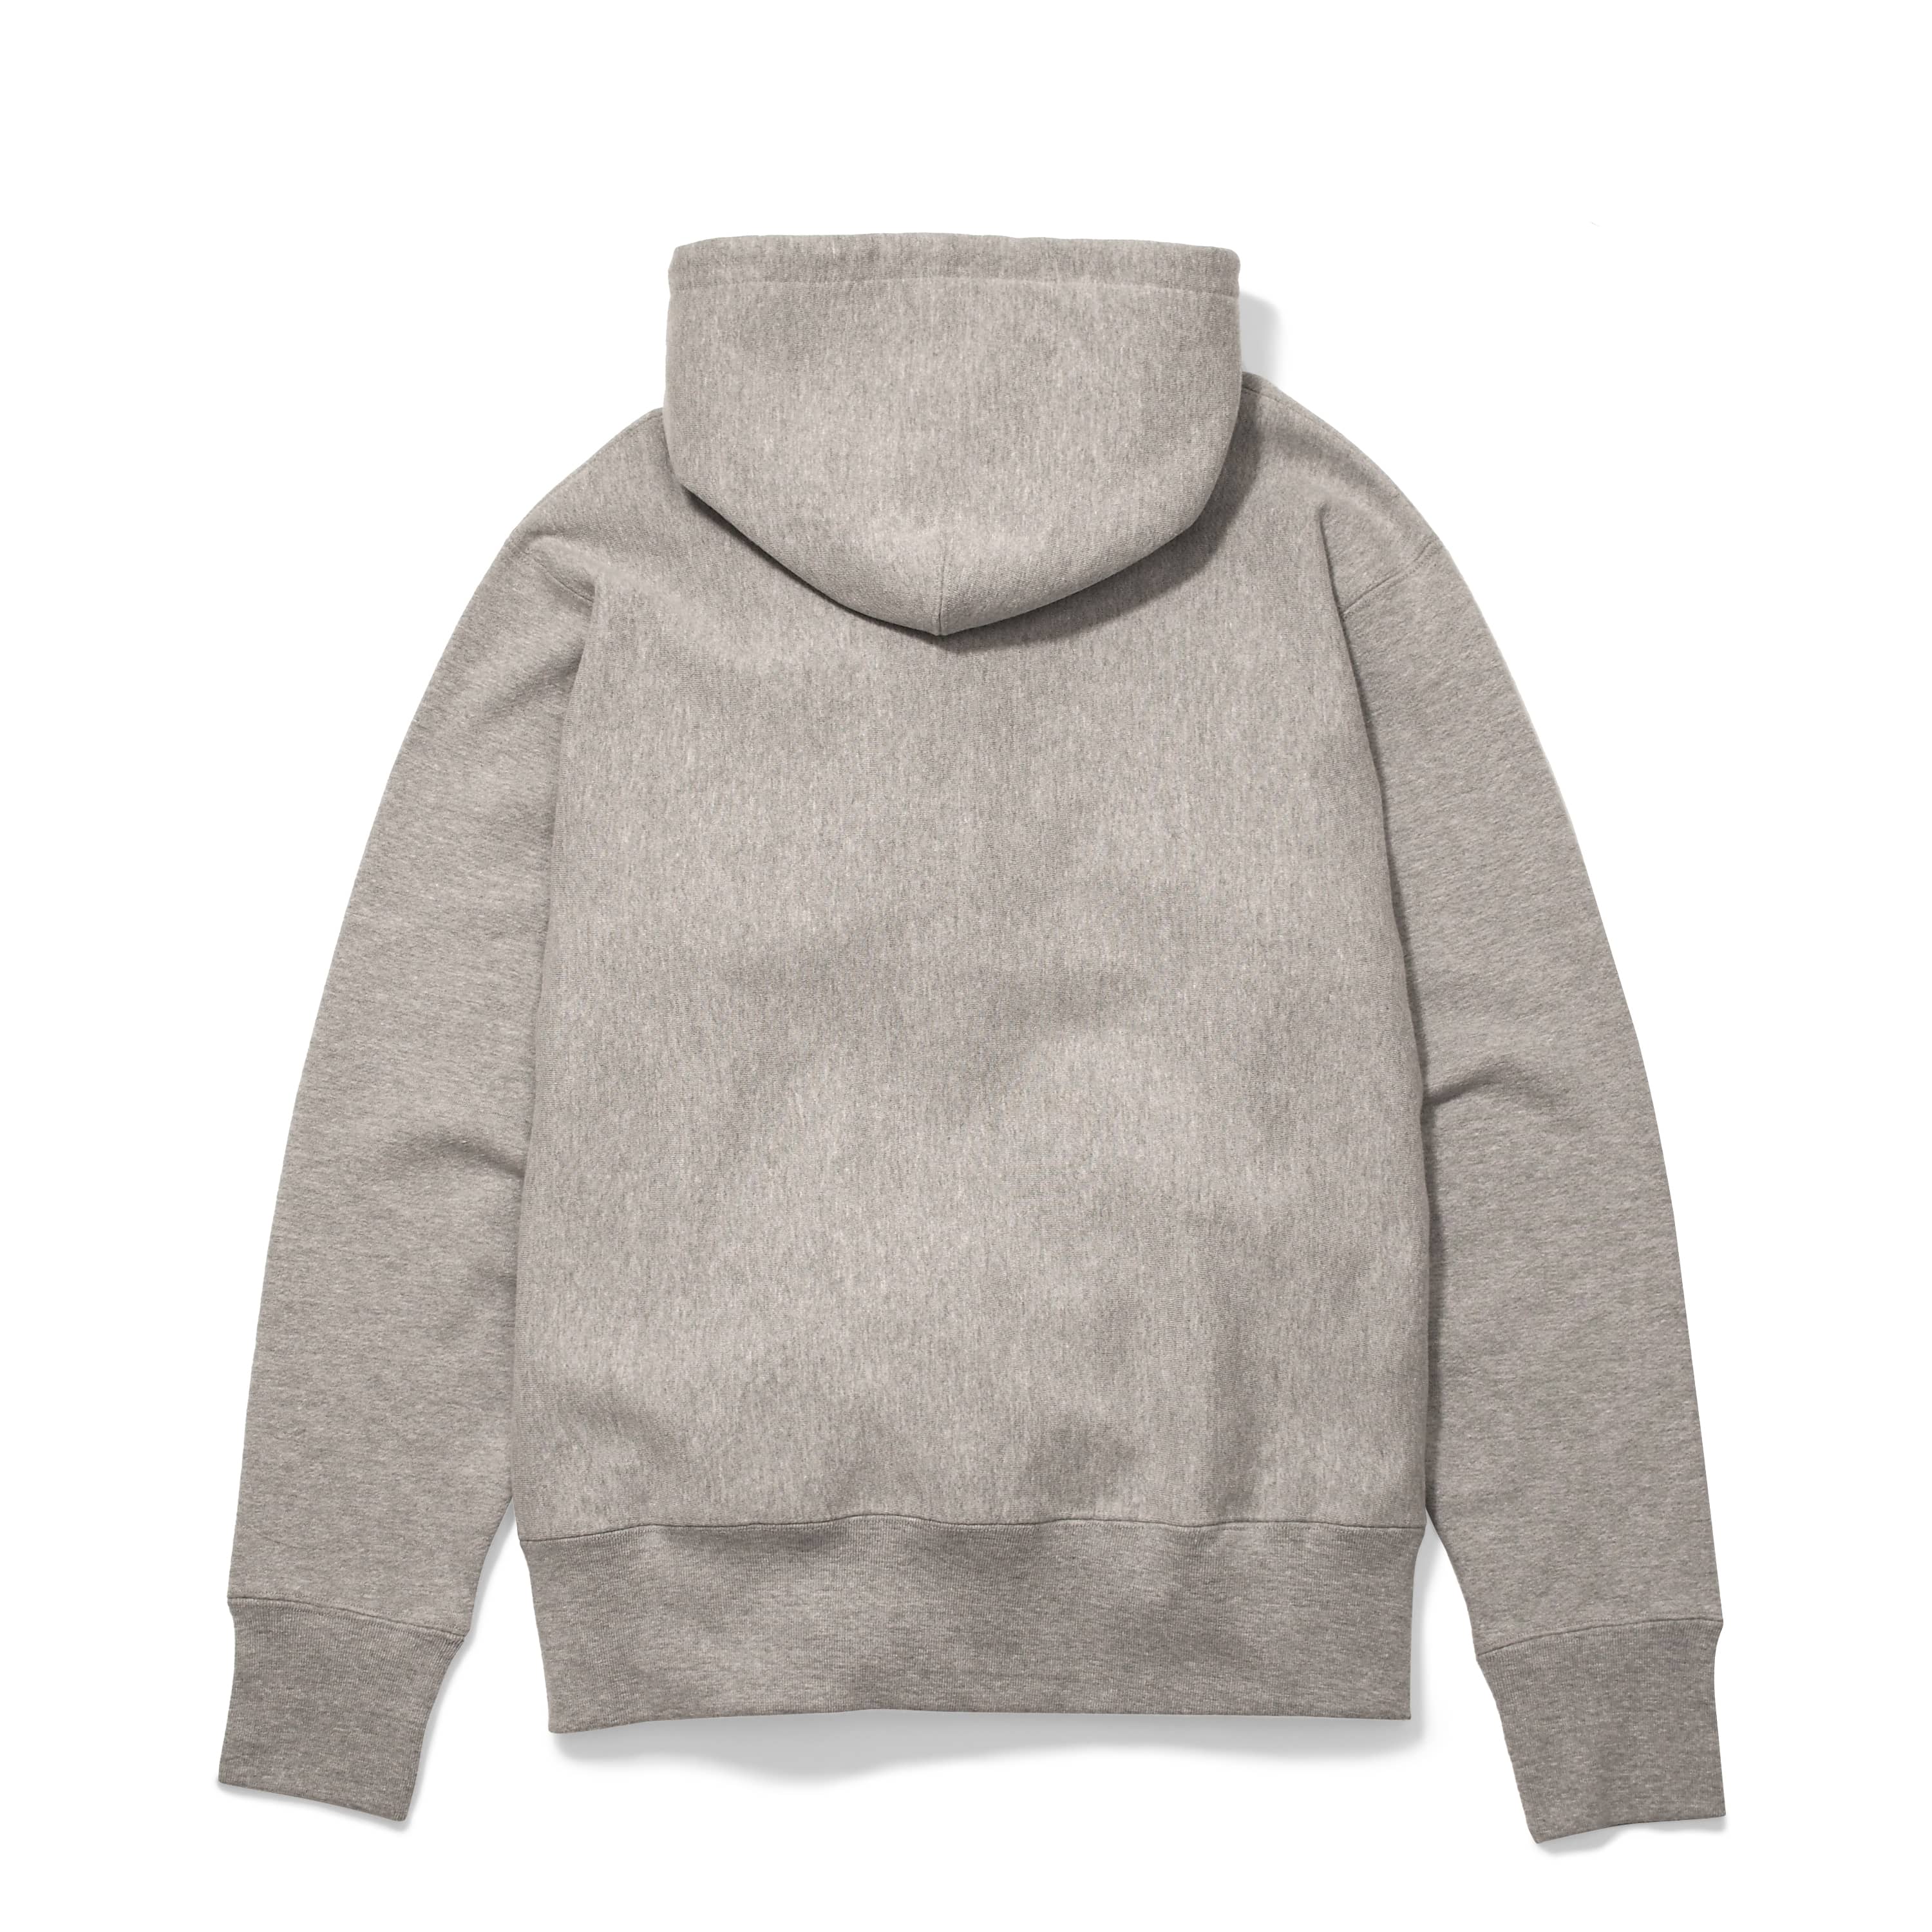 RELAXED FIT PULLOVER HOODED SWEATSHIRT